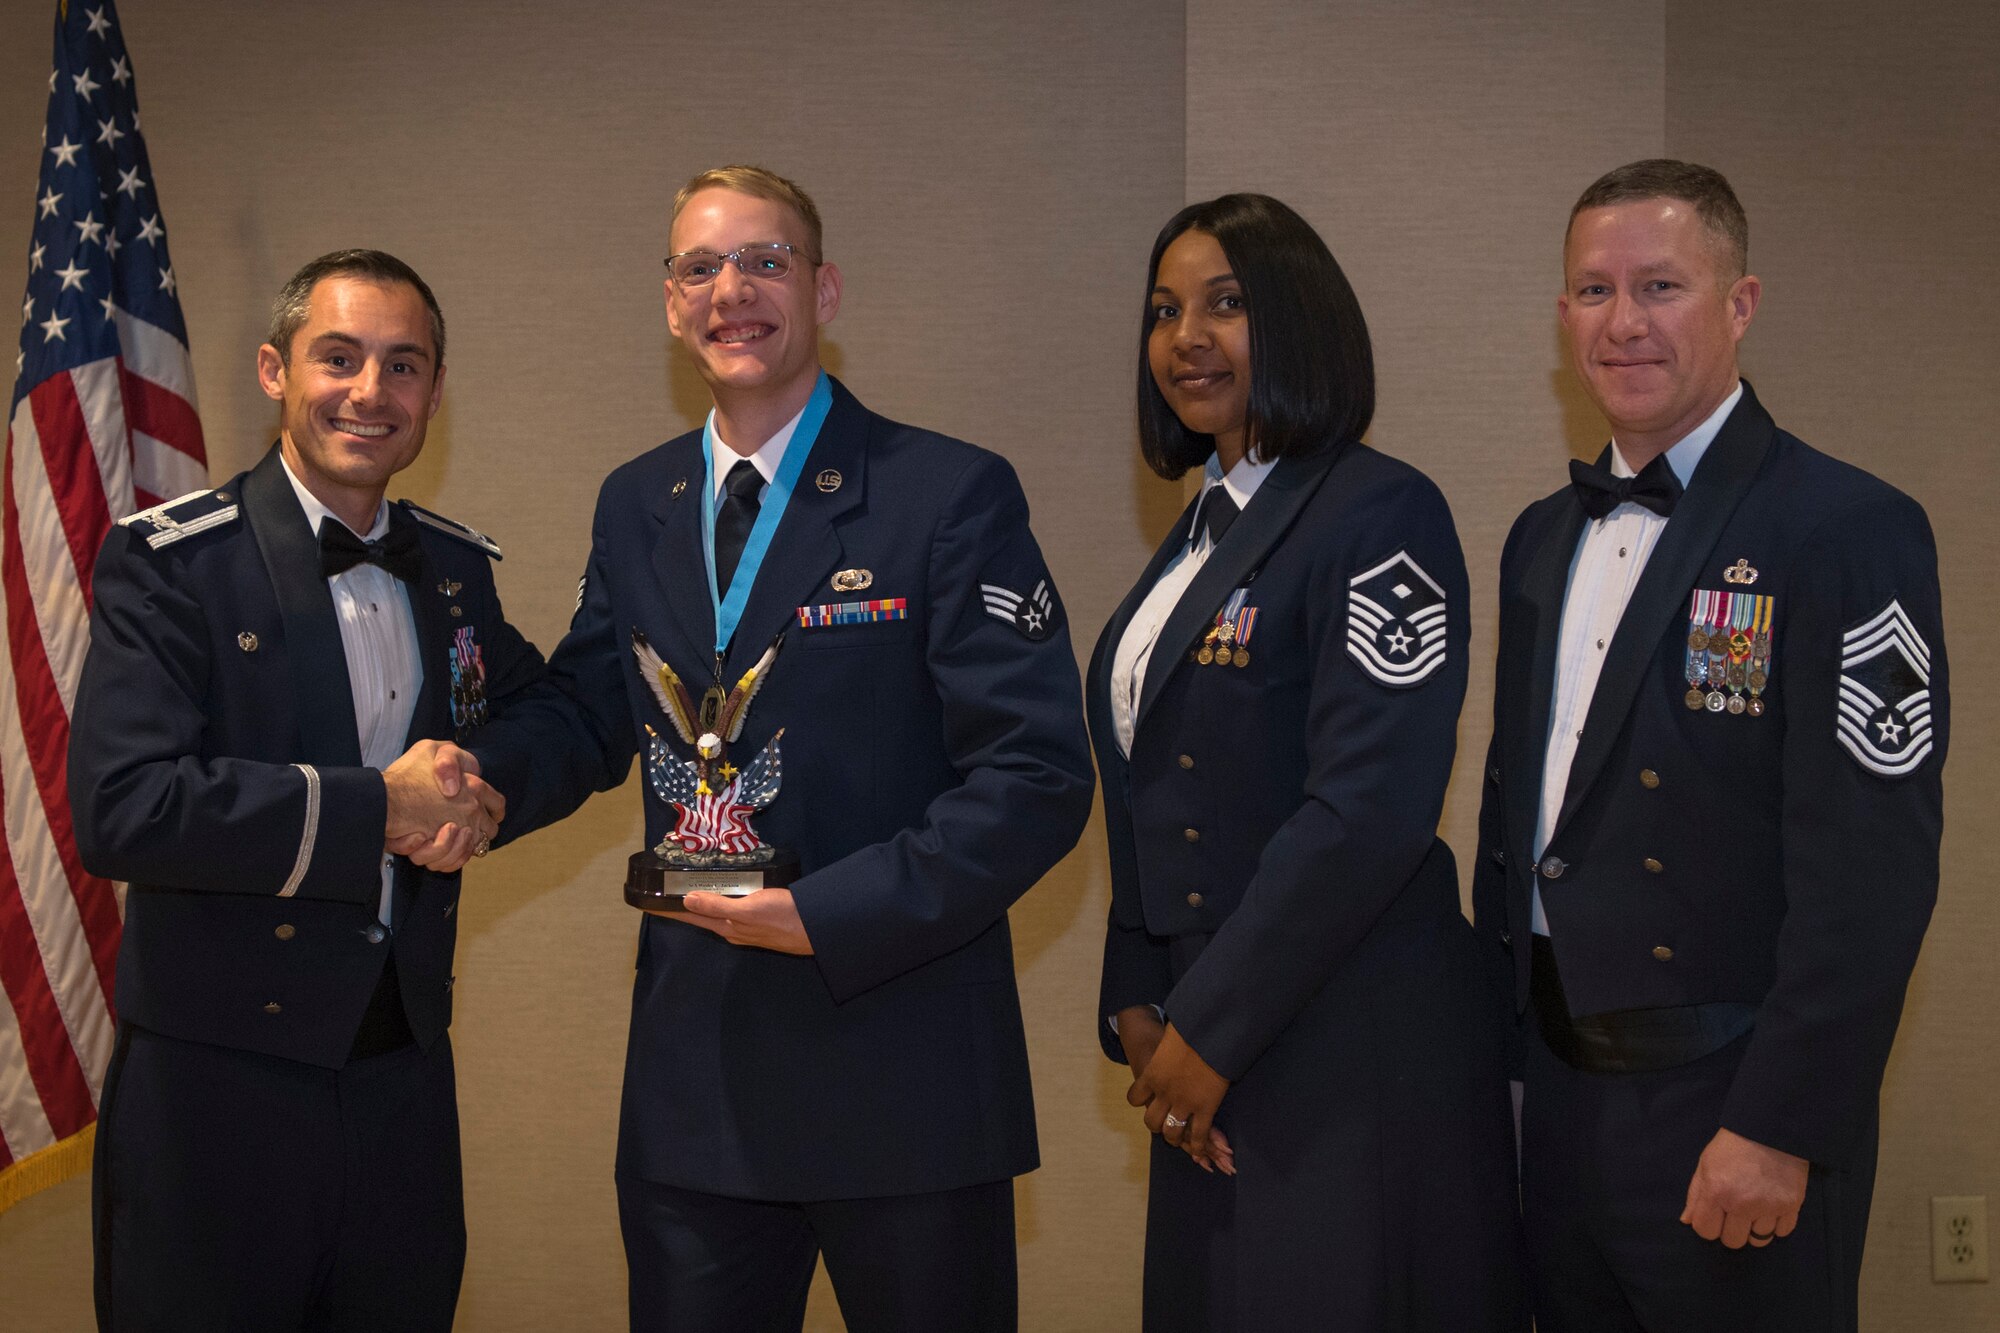 Airmen recieve awards from Airman Leadership School (ALS), Feb. 7, 2019, at Moody Air Force Base, Ga. ALS is a the 5-week course designed to develop Airmen into effective front-line supervisors by focusing on building leadership abilities, teamwork skills and effective communication. (U.S. Air Force photo by Airman Taryn Butler)